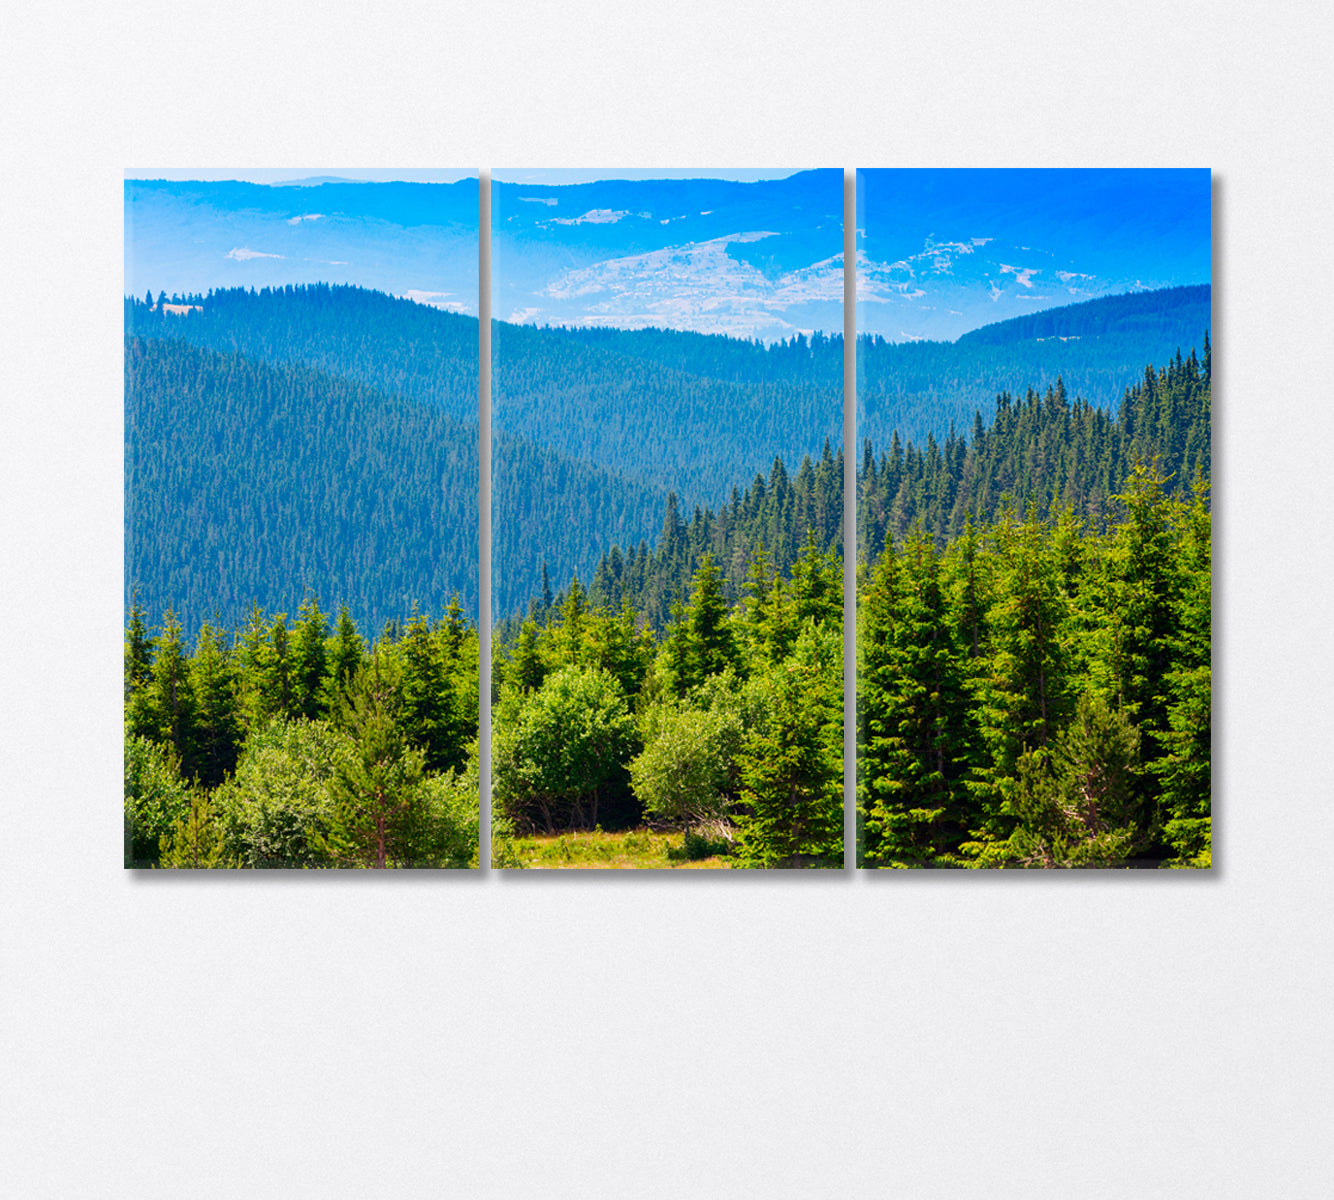 Aerial View of the Pine Forest Canvas Print-Canvas Print-CetArt-3 Panels-36x24 inches-CetArt